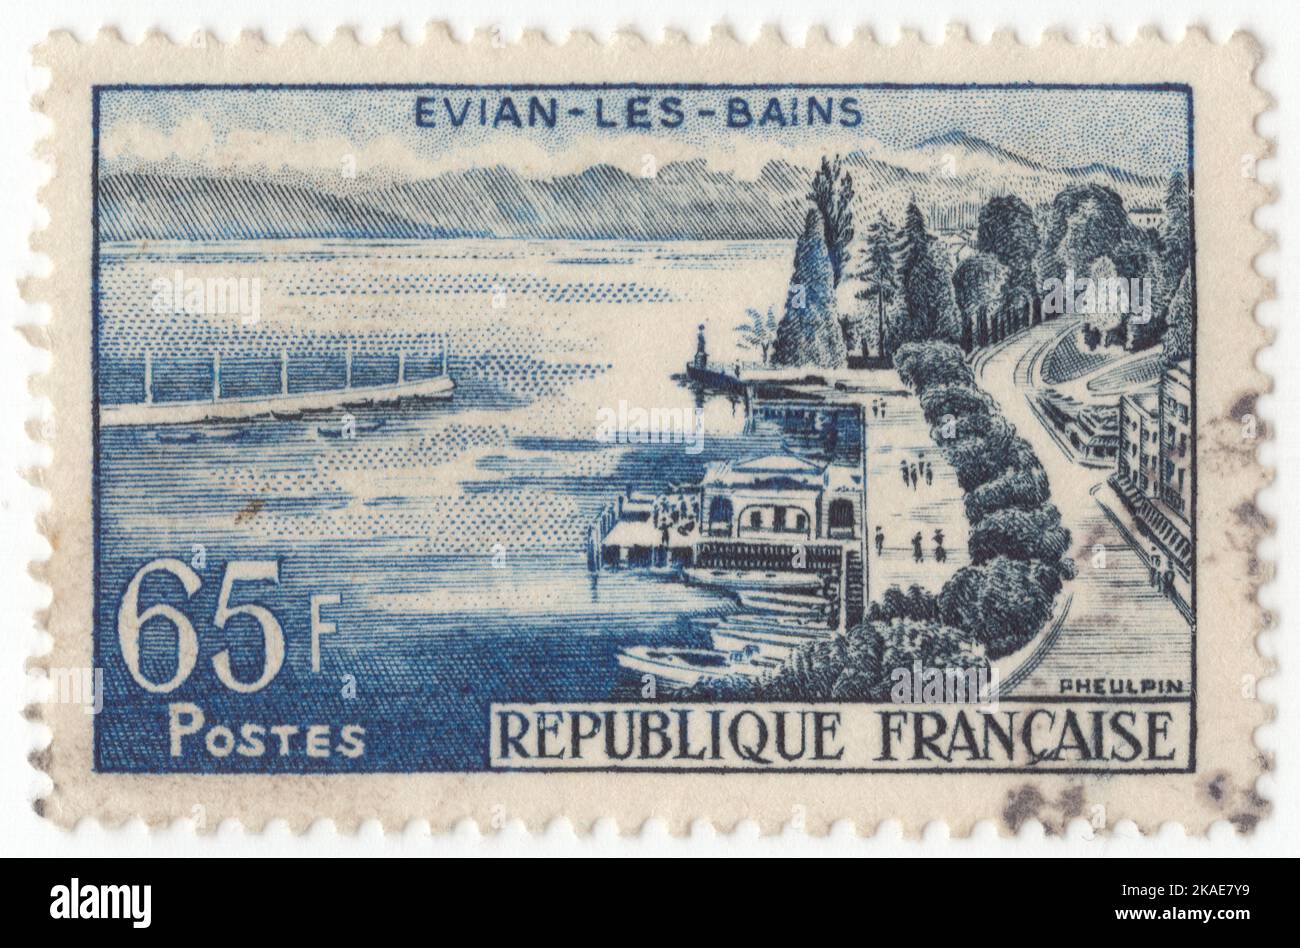 FRANCE - 1957 October 19: An 65 francs dark blue and indigo postage stamp depicting Evian-les-Bains, or simply Evian. A high-market holiday resort and spa town on the shores of Lake Geneva, it has been visited, over two centuries, by royalty such as Kings Edward VII and George V of the United Kingdom and King Farouk of Egypt, and celebrities such as countess Anna de Noailles and Marcel Proust Stock Photo